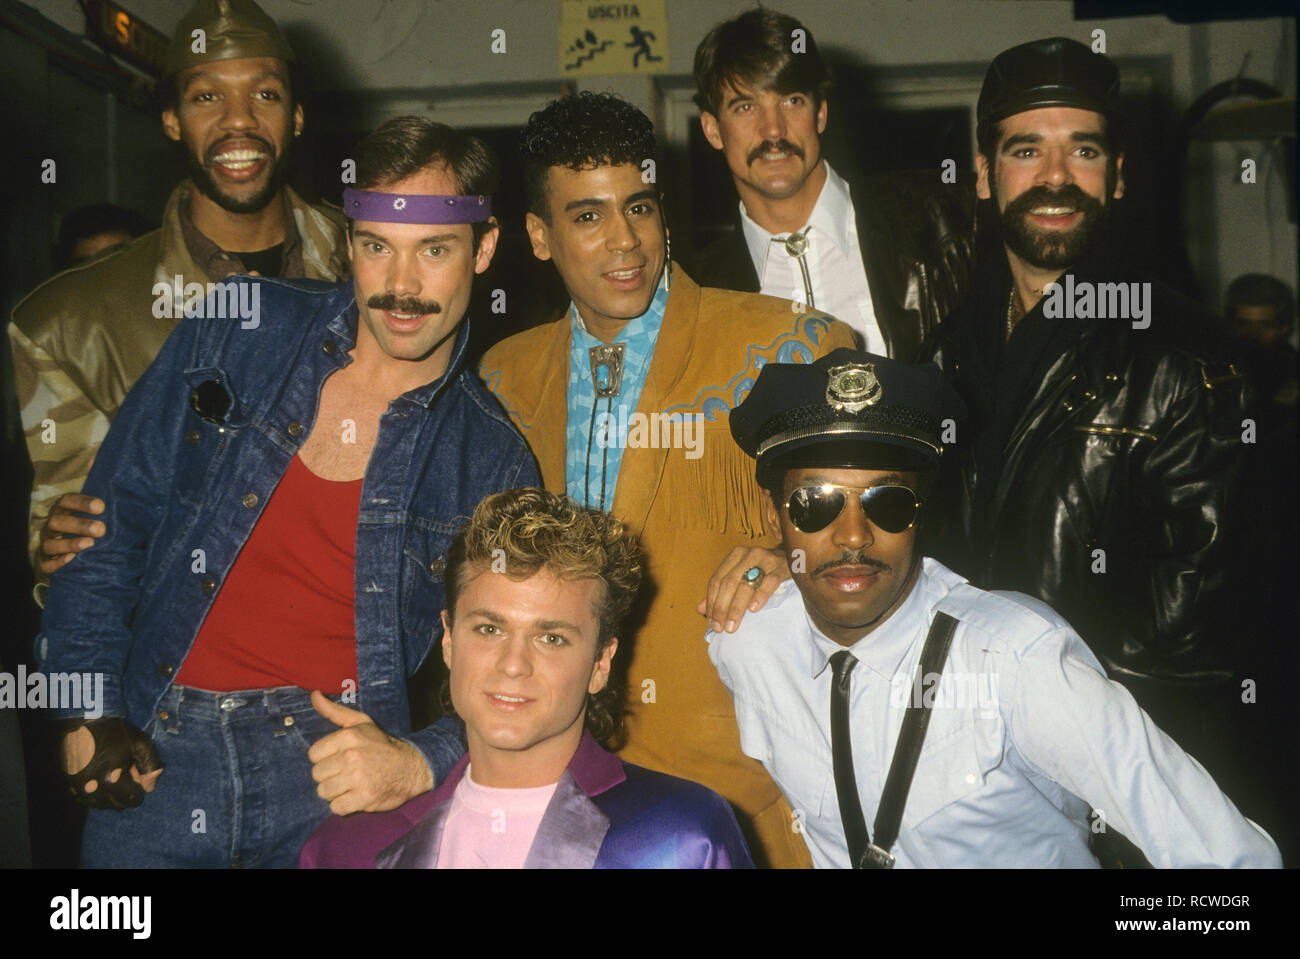 village people characters